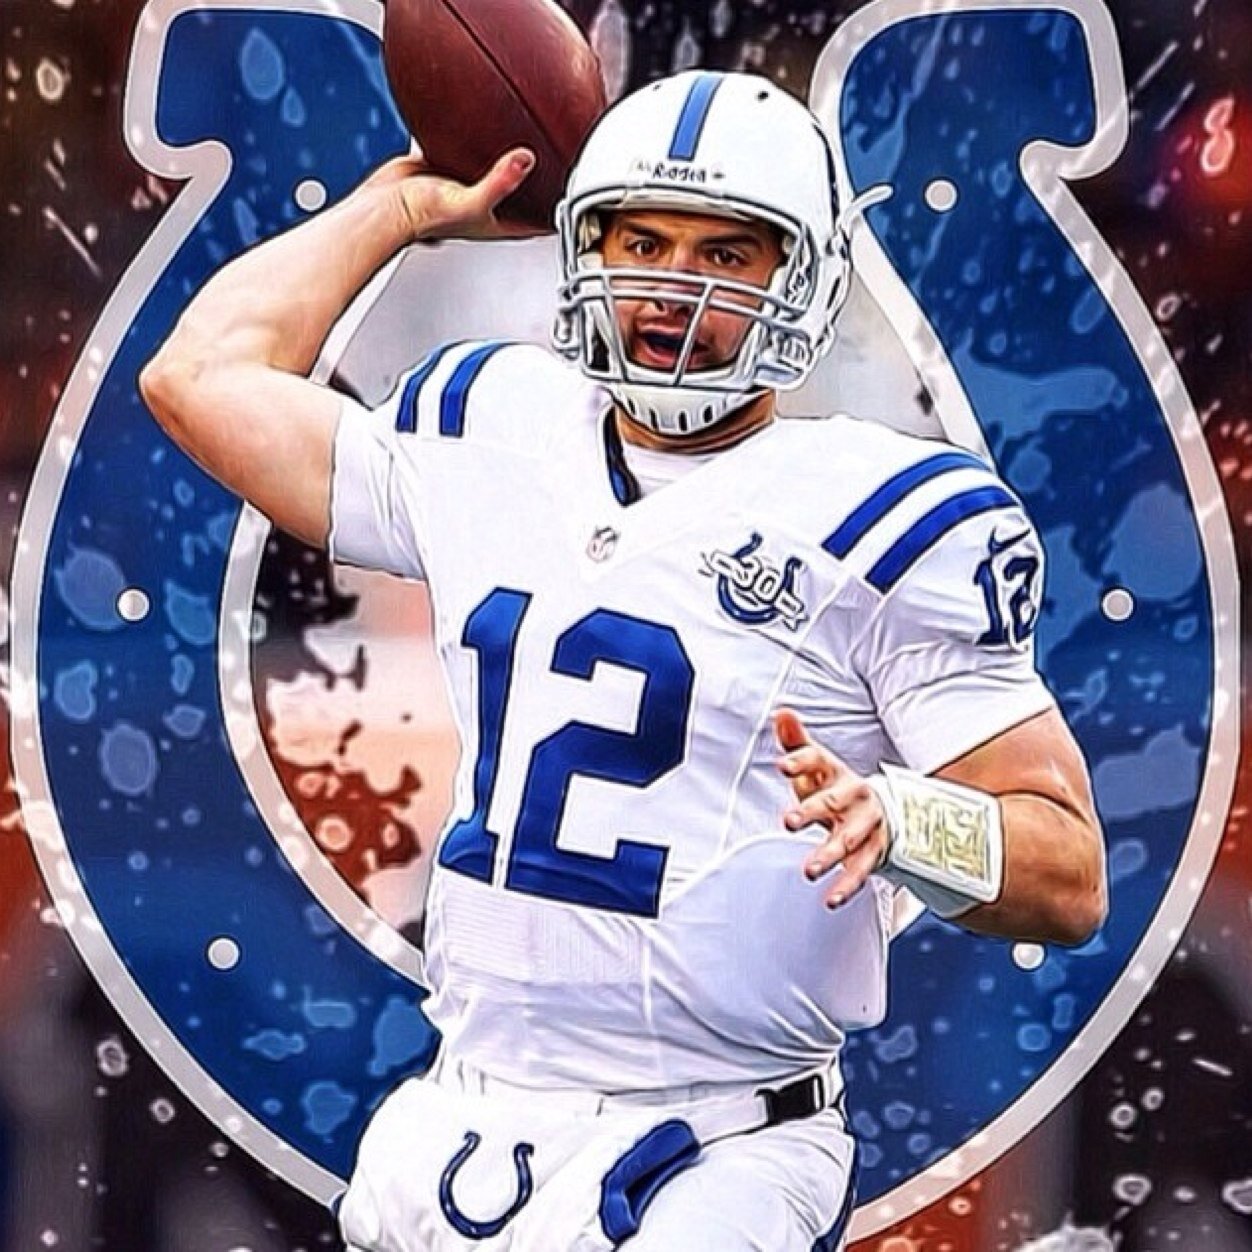 #ColtsNation #PacerNation . #RedSox ..I try to be unbiased as I can, but really don't..I sometimes tweet on @ColtsFans12.. This account is inactive alot